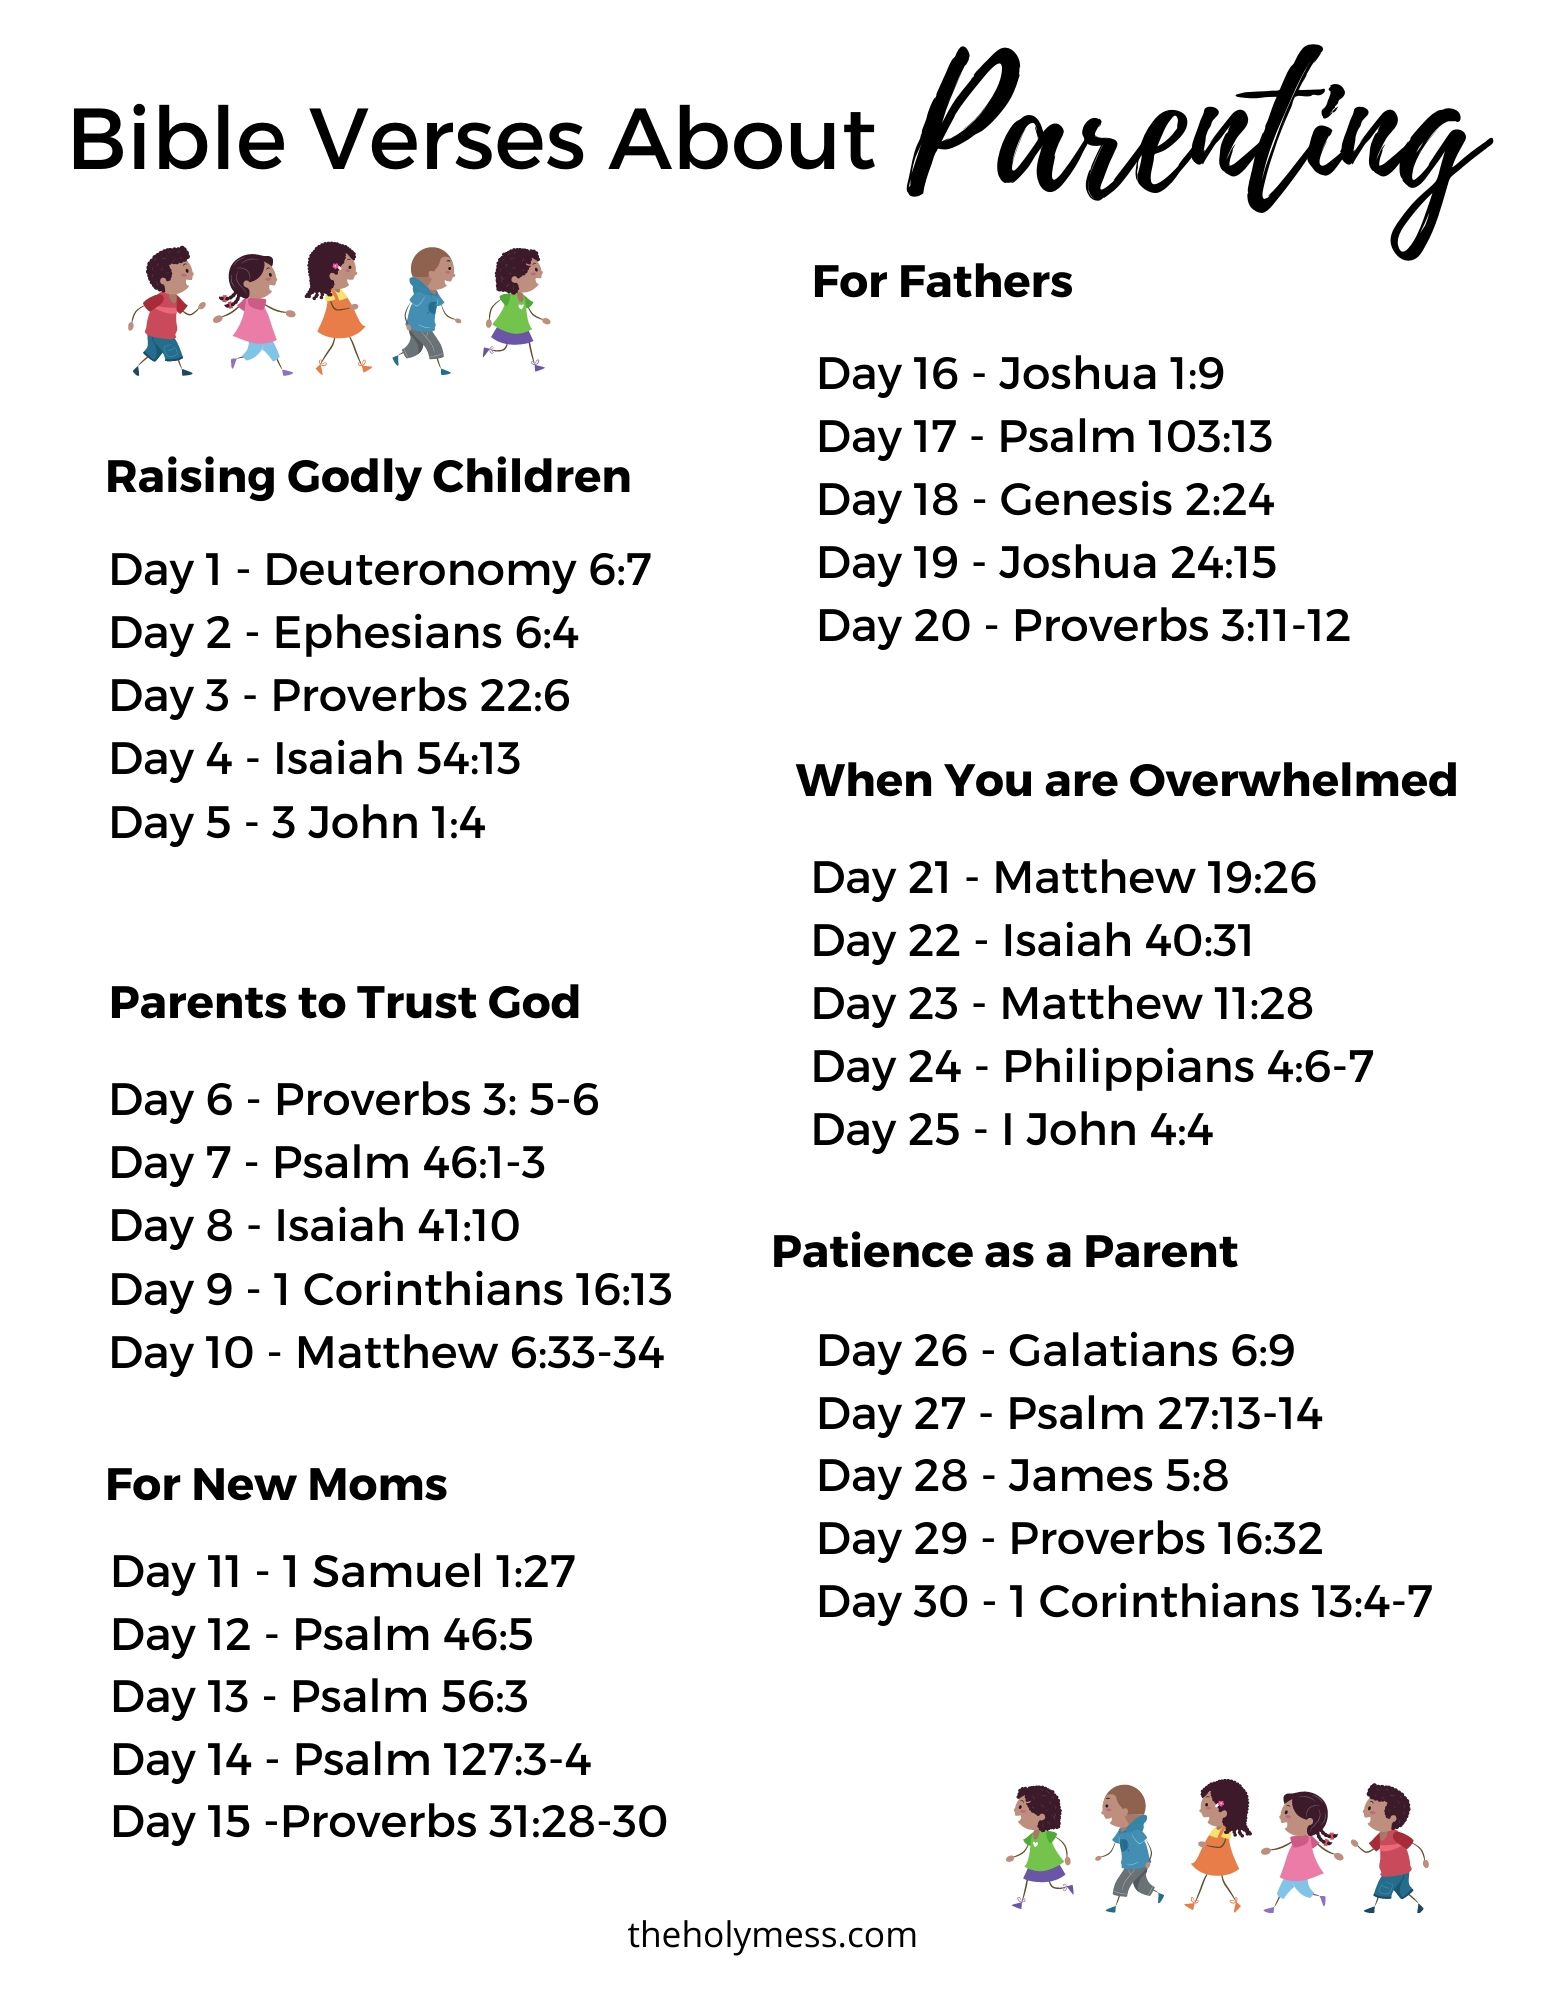 Bible Verses for Parenting